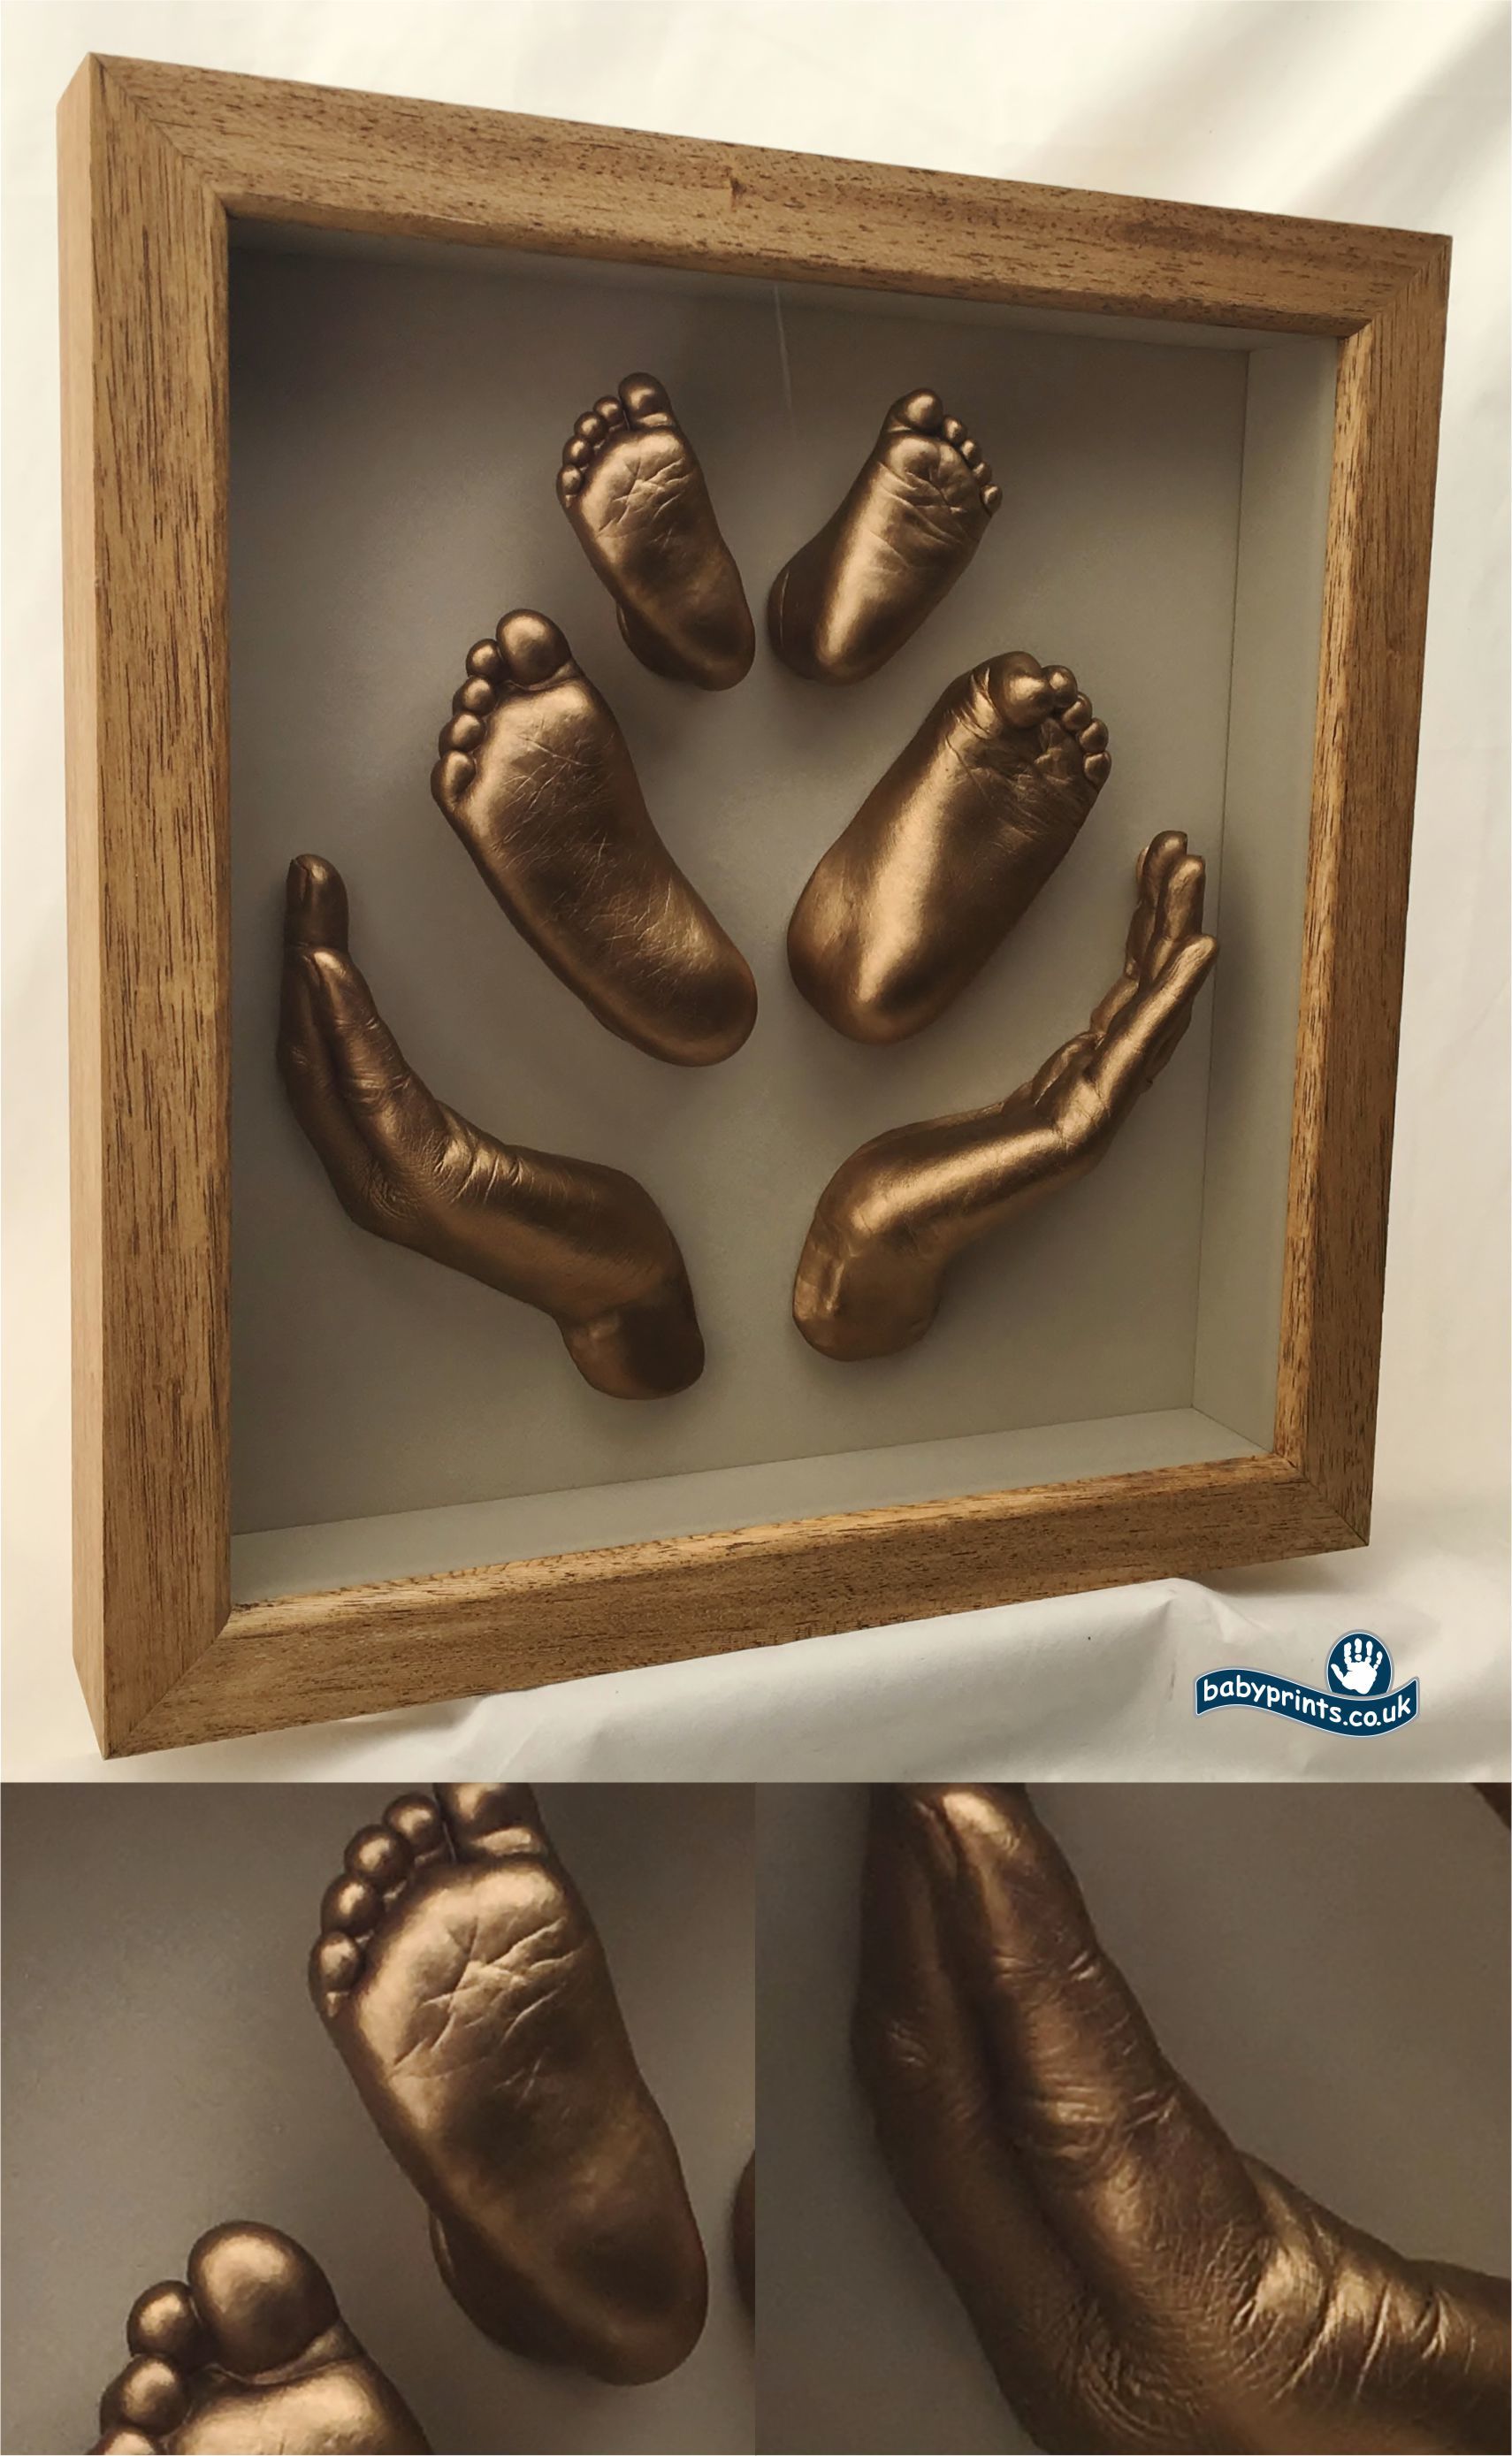 Family hands and feet statues framed